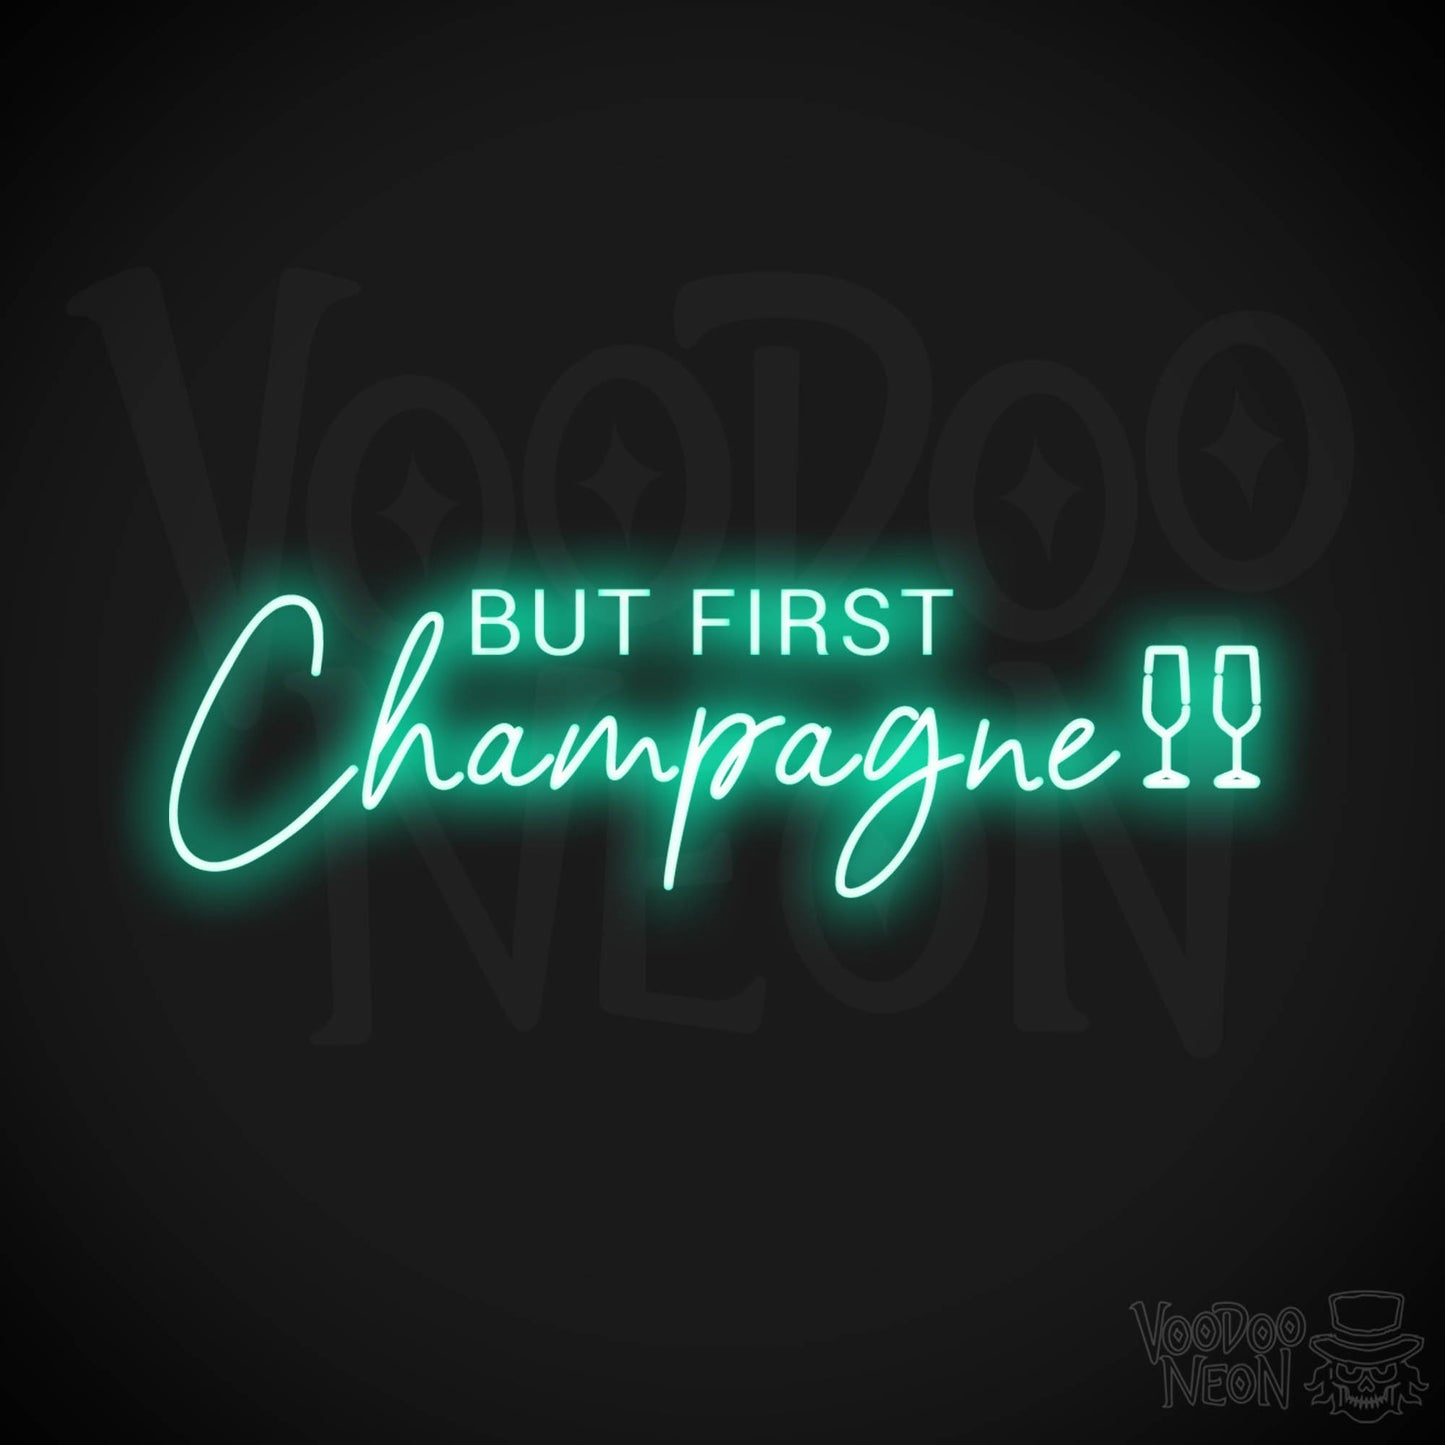 But First Champagne Neon Sign - Neon But First Champagne Sign - Neon Wall Art - Color Light Green